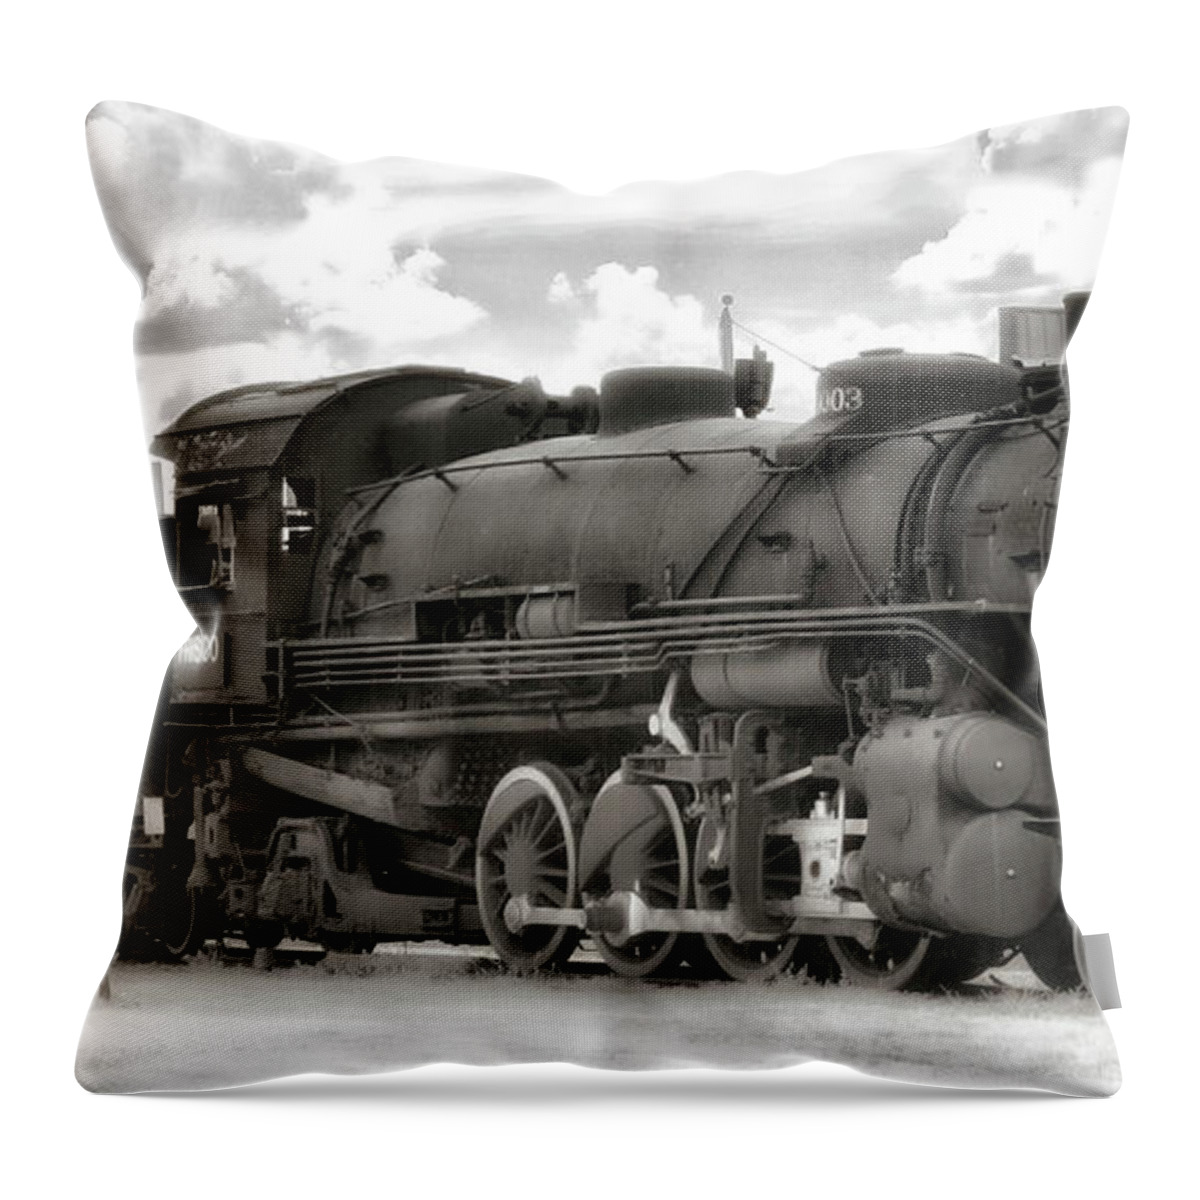  Throw Pillow featuring the photograph Frisco Train by William Rainey